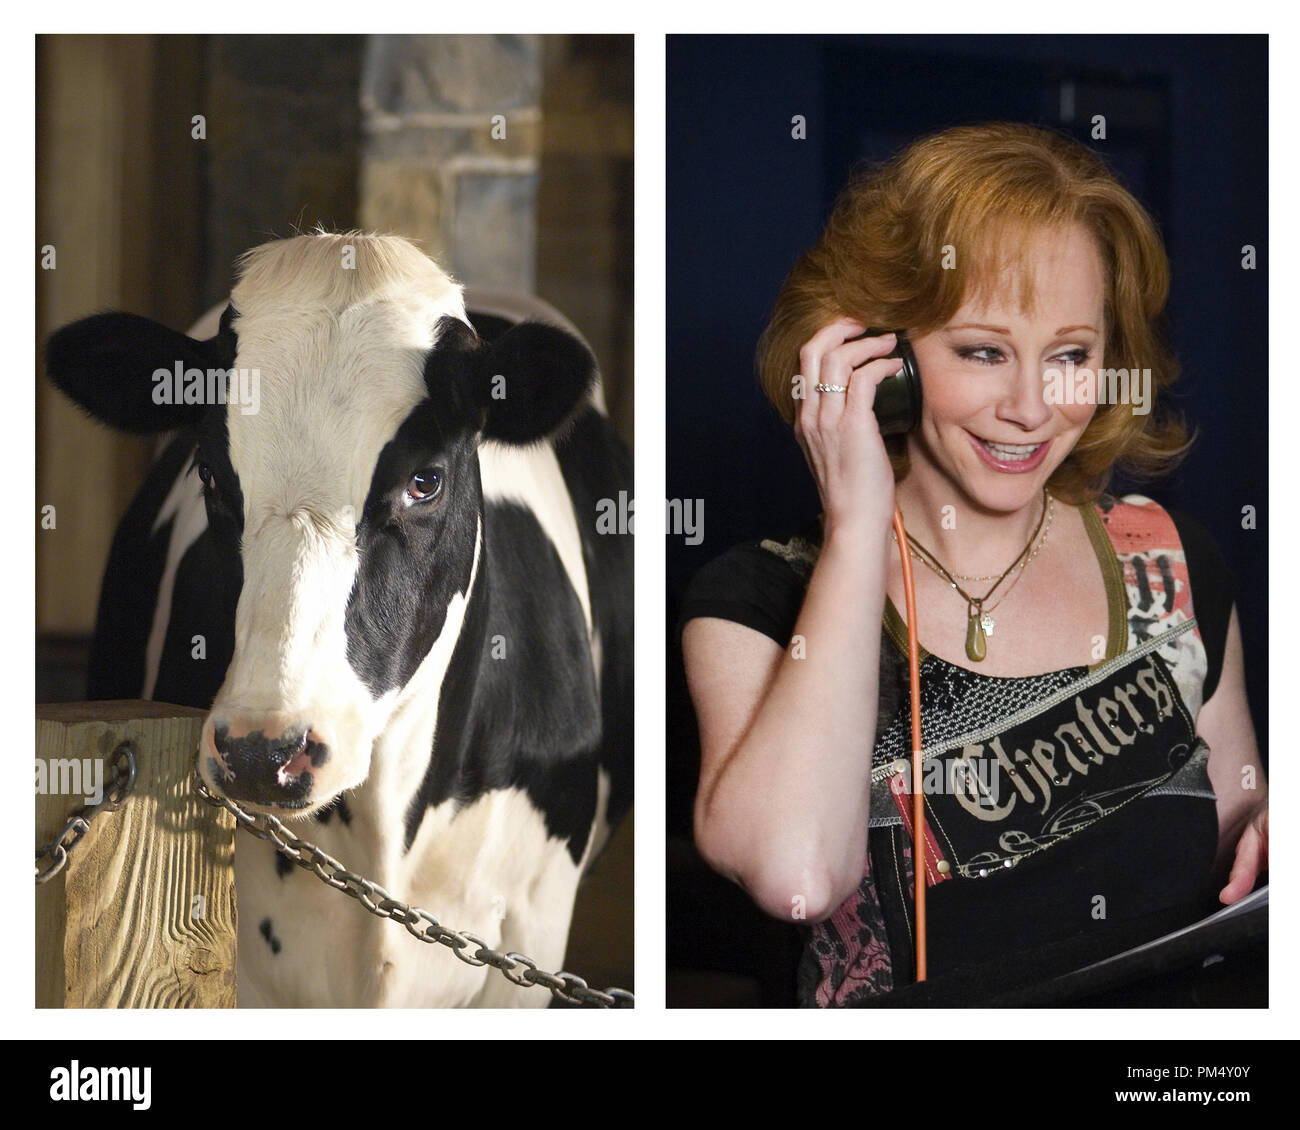 Film Still / Publicity Still from 'Charlotte's Web' Betsy (Reba McEntire) © 2006 Paramount Pictures Photo Credit: Suzy Wood / Mark Fellman   File Reference # 30737272THA  For Editorial Use Only -  All Rights Reserved Stock Photo